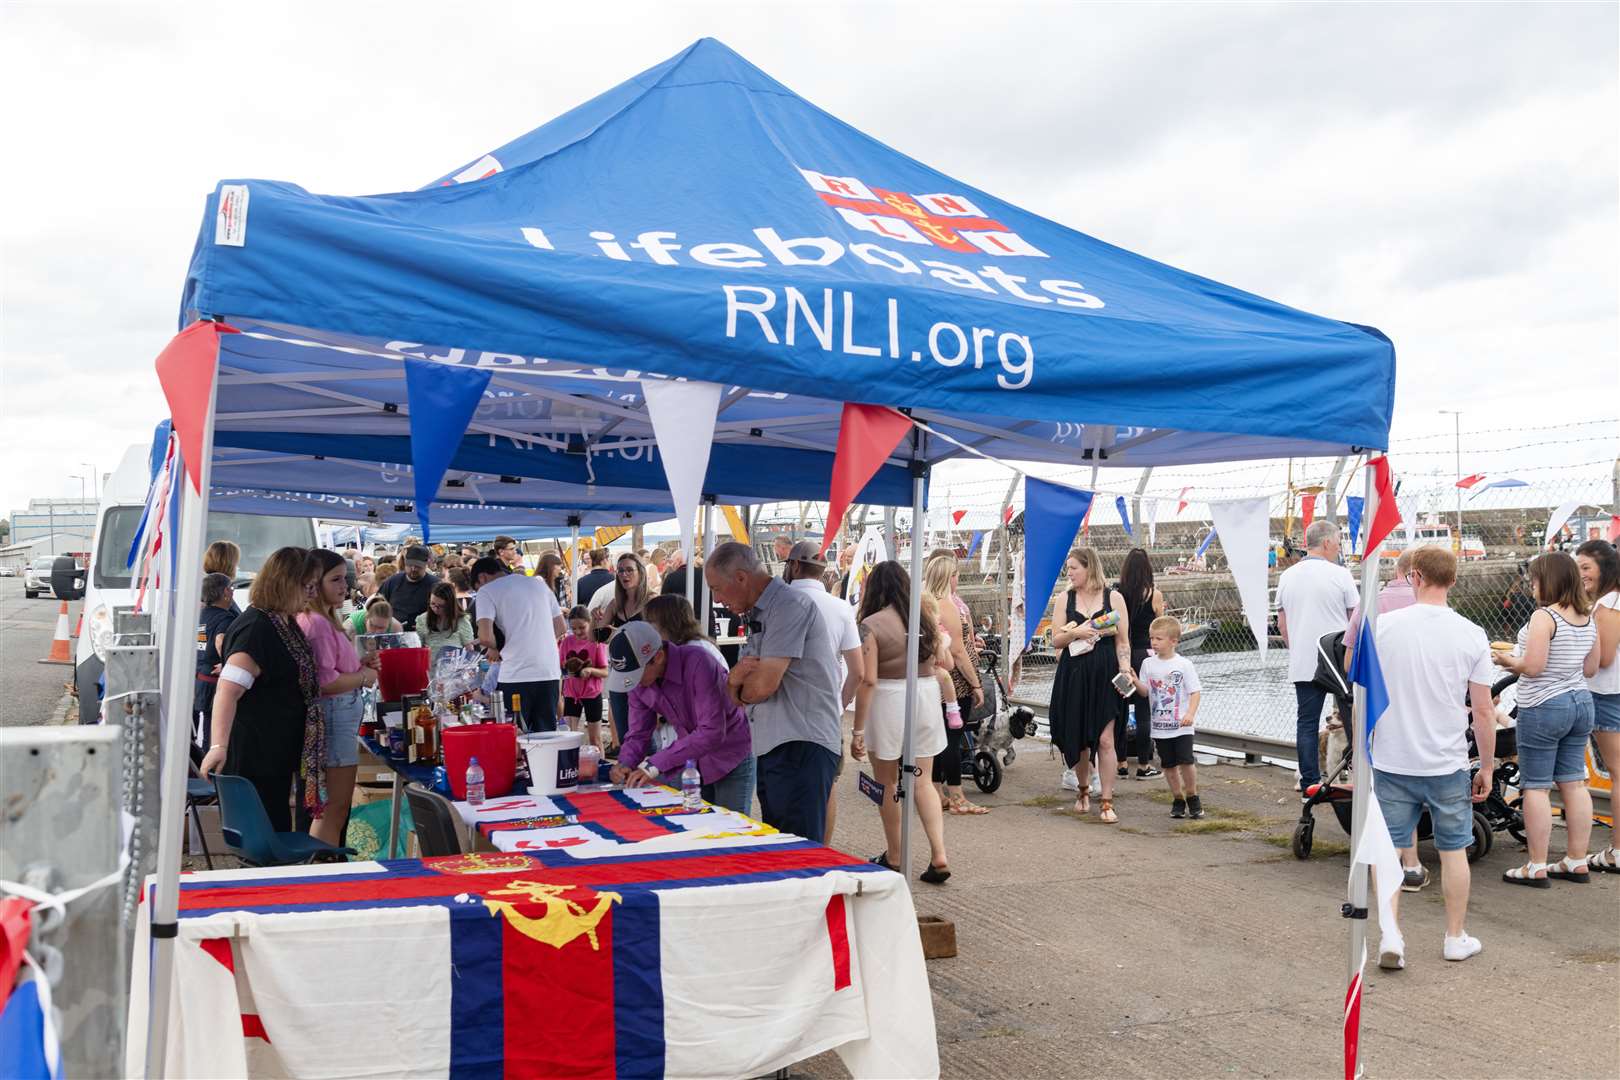 Buckie RNLI's Lifeboat Open Day drew the crowds, with an even bigger event promised next year to mark the charity's 200th anniversary. Picture: Beth Taylor